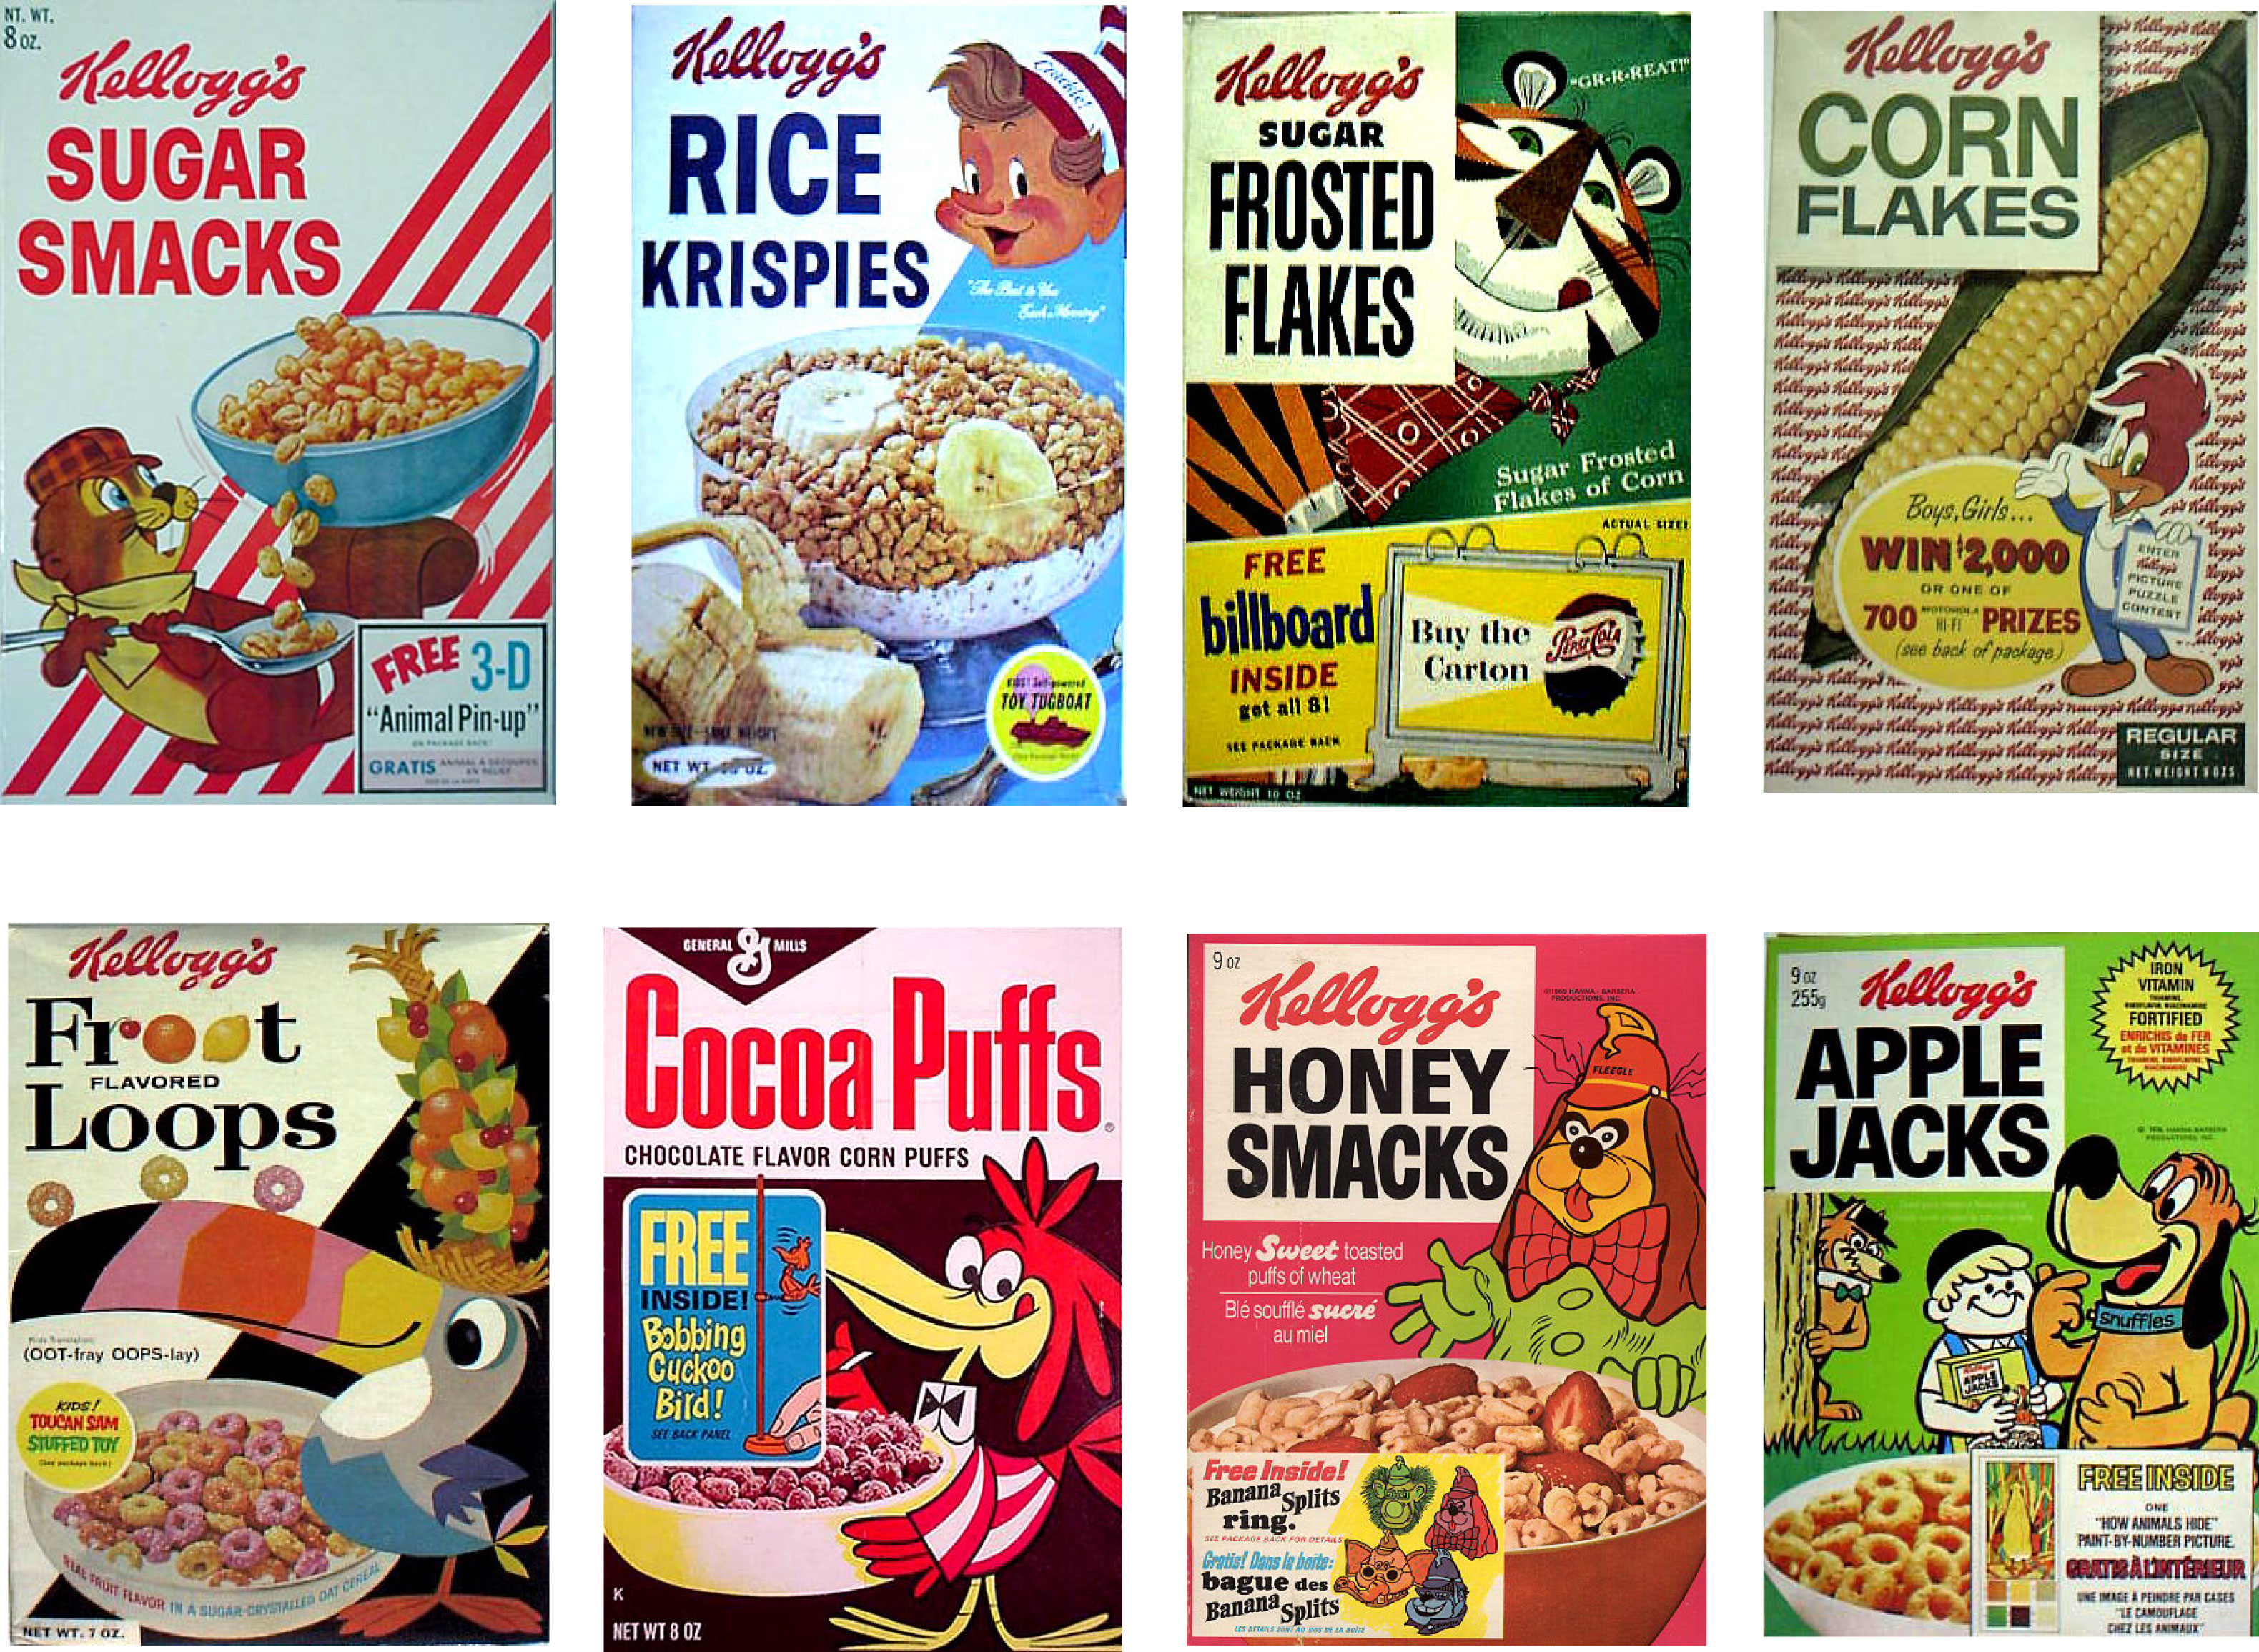 child food packaging - Kellogg's eg Sugar Kellogg's Sugar Smacks Kellogg's Rice Krispies Kellogg's Corn Flakes A Frosted Flakes Sugar Frosted Free Bys. ... Win 2,000 12 700 Prizes Free 3D billboard Buy the Inside Carton "Animal Pinup tidigare Kellogg' Fro